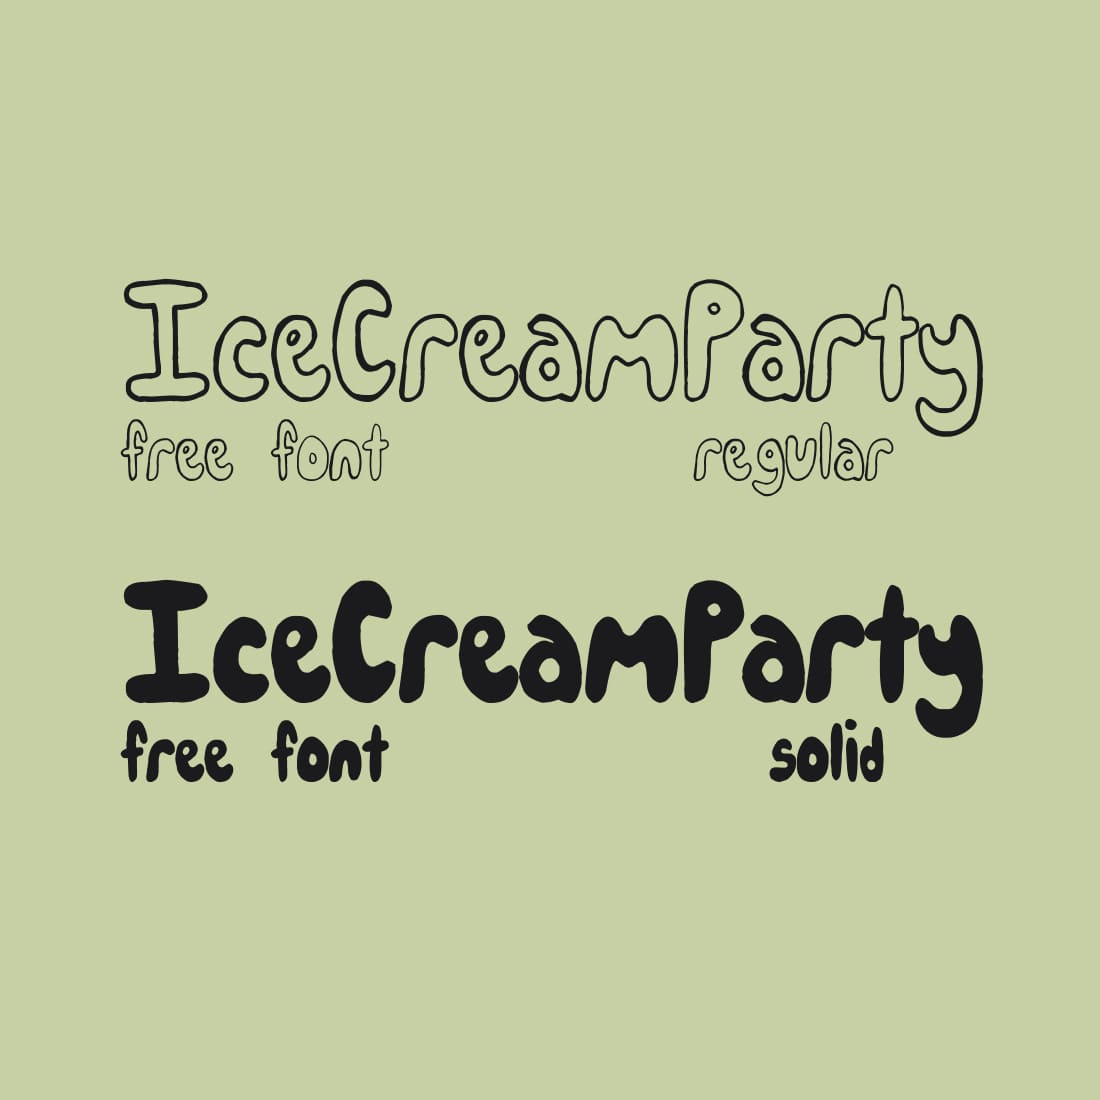 Free IceCreamParty Font Solid and Regular Cover Preview.